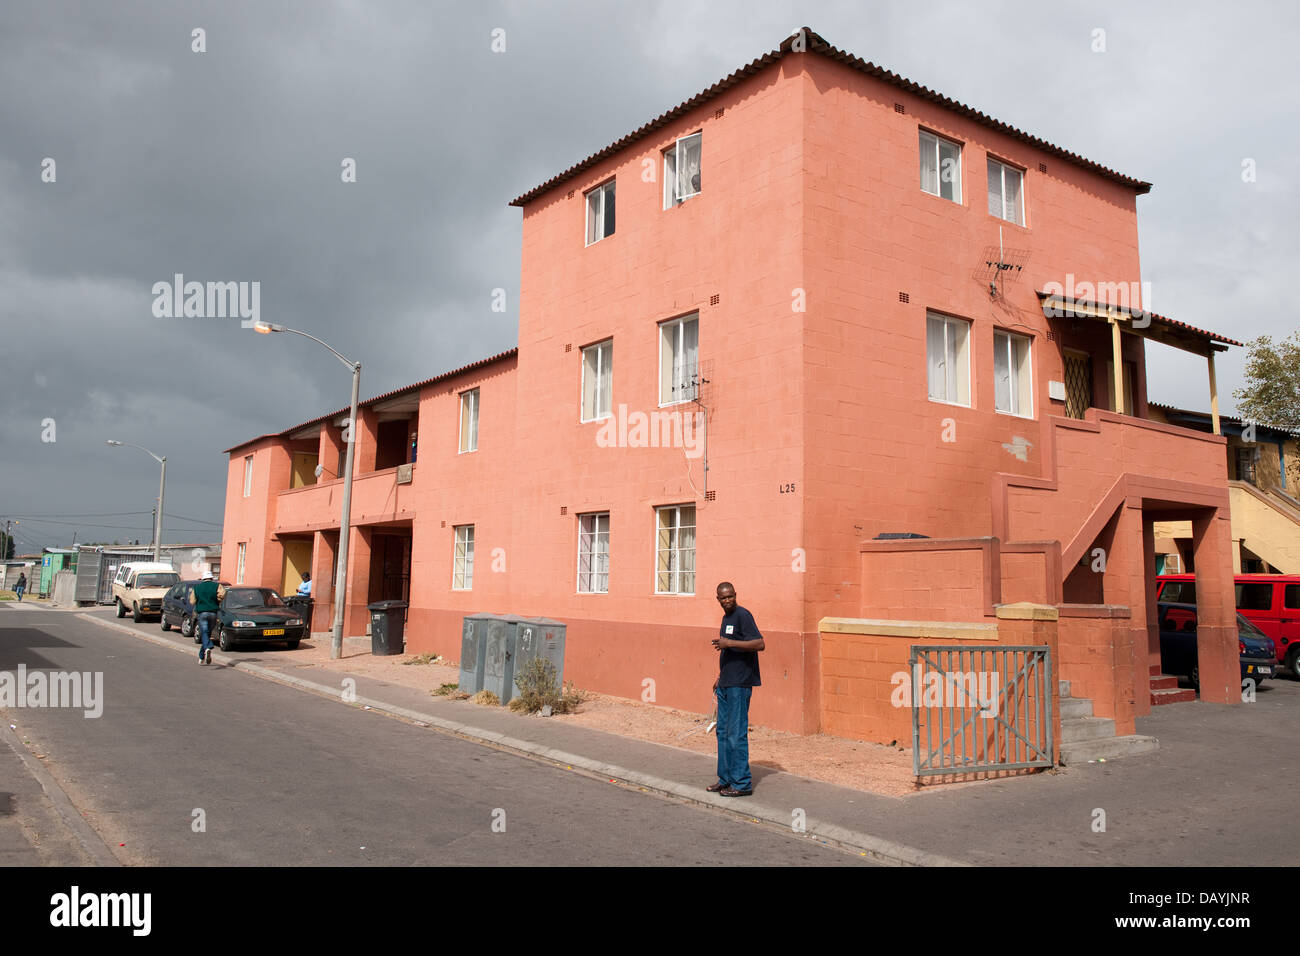 Former workers hostel, Langa township, Cape Town, South Africa Stock Photo  - Alamy